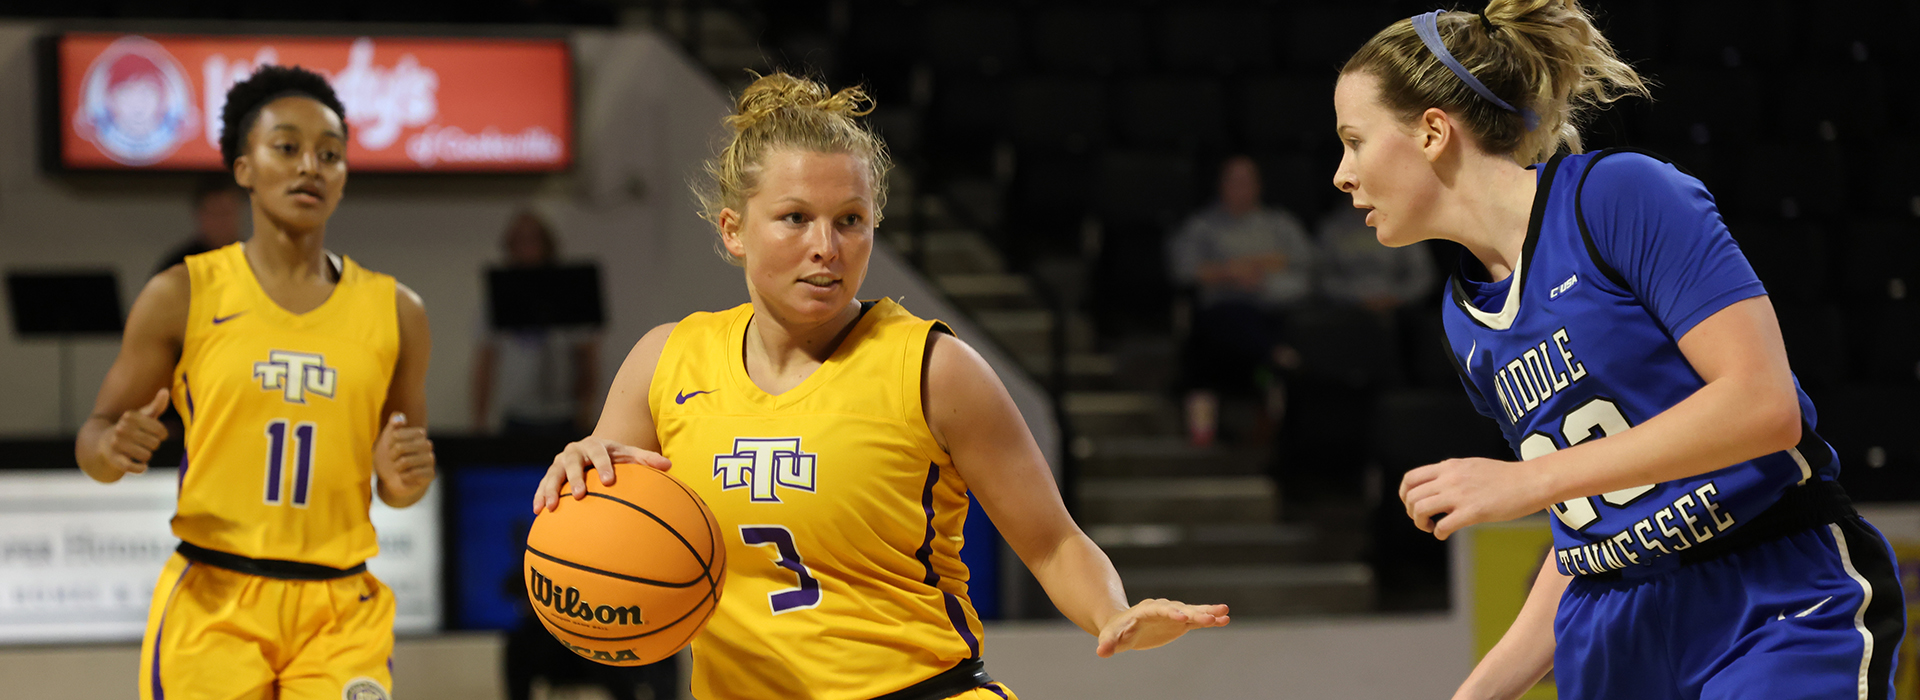 Golden Eagle women open OVC play this weekend at TSU and Murray State